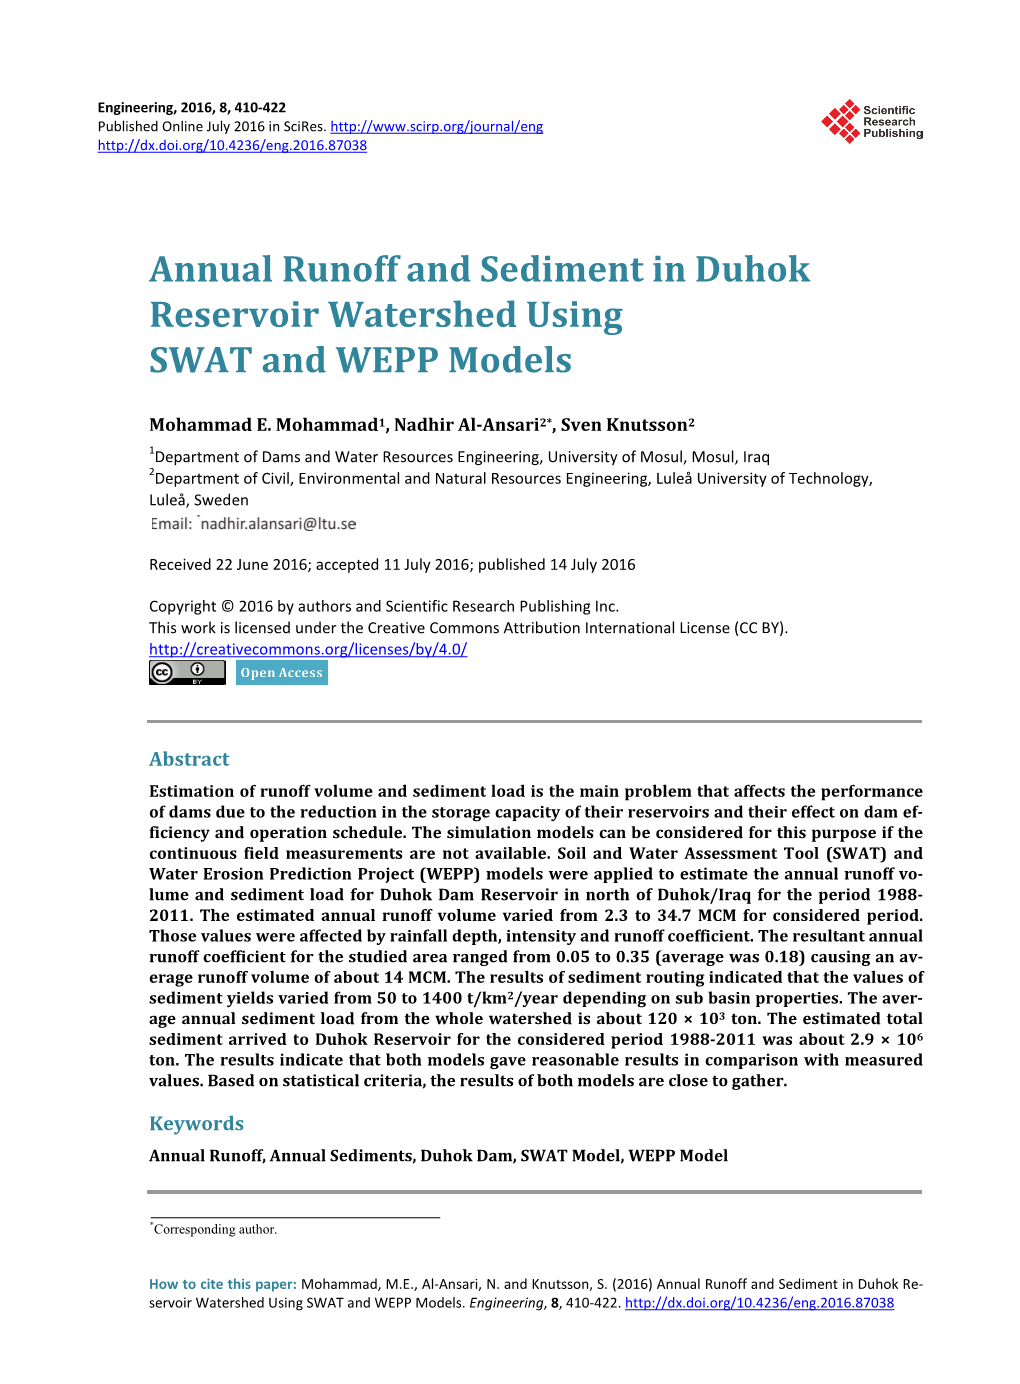 Annual Runoff and Sediment in Duhok Reservoir Watershed Using SWAT and WEPP Models